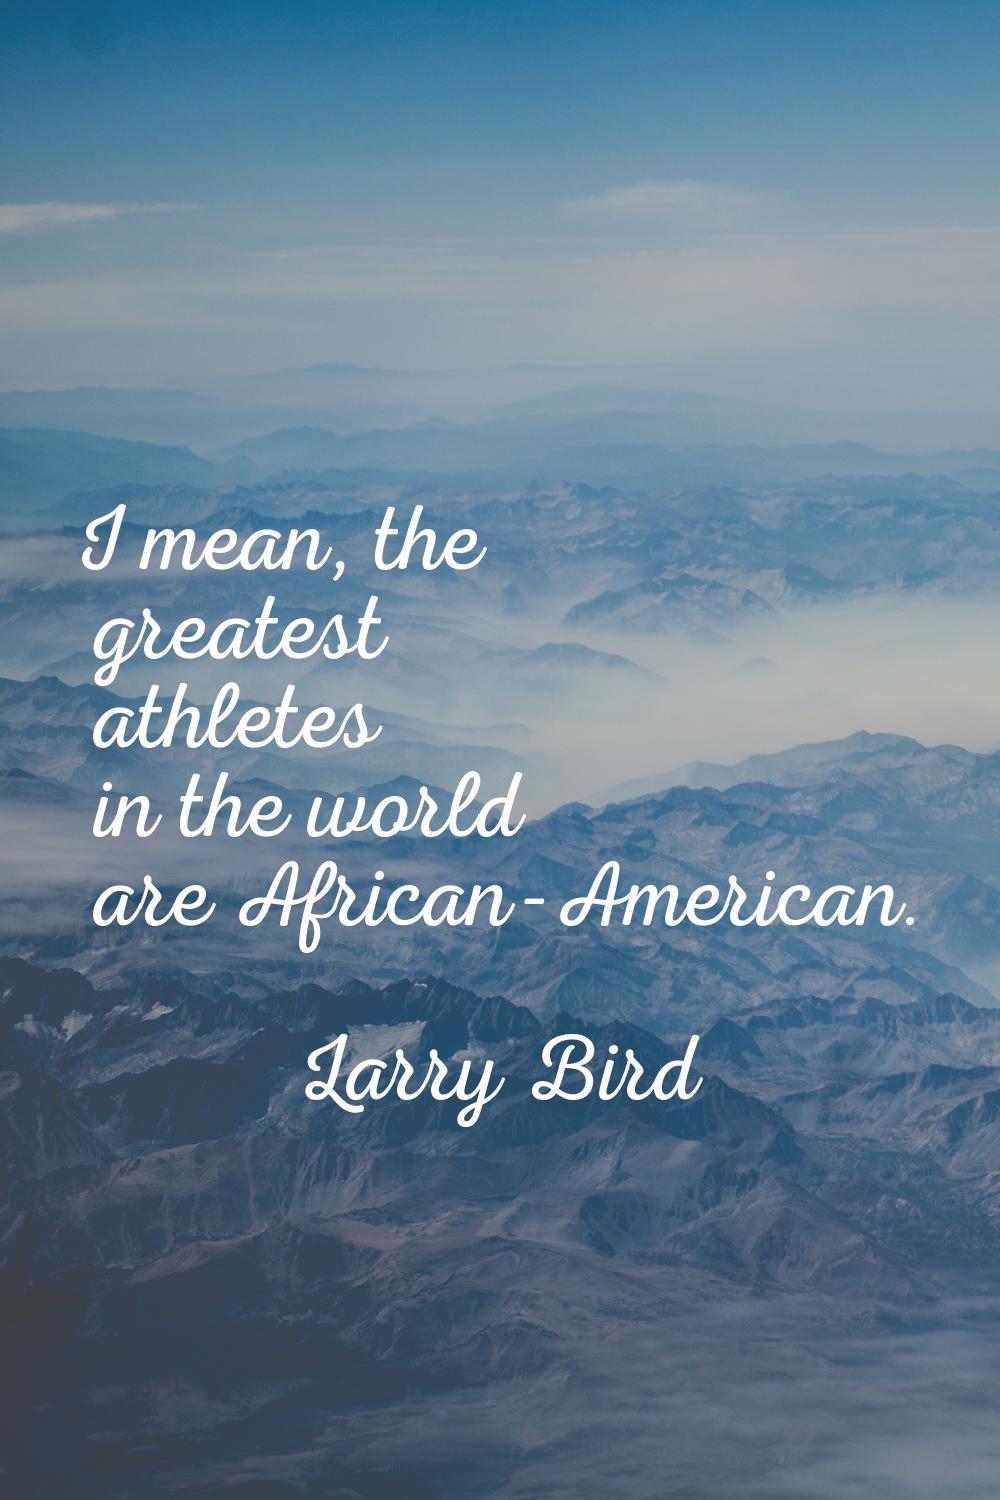 I mean, the greatest athletes in the world are African-American.